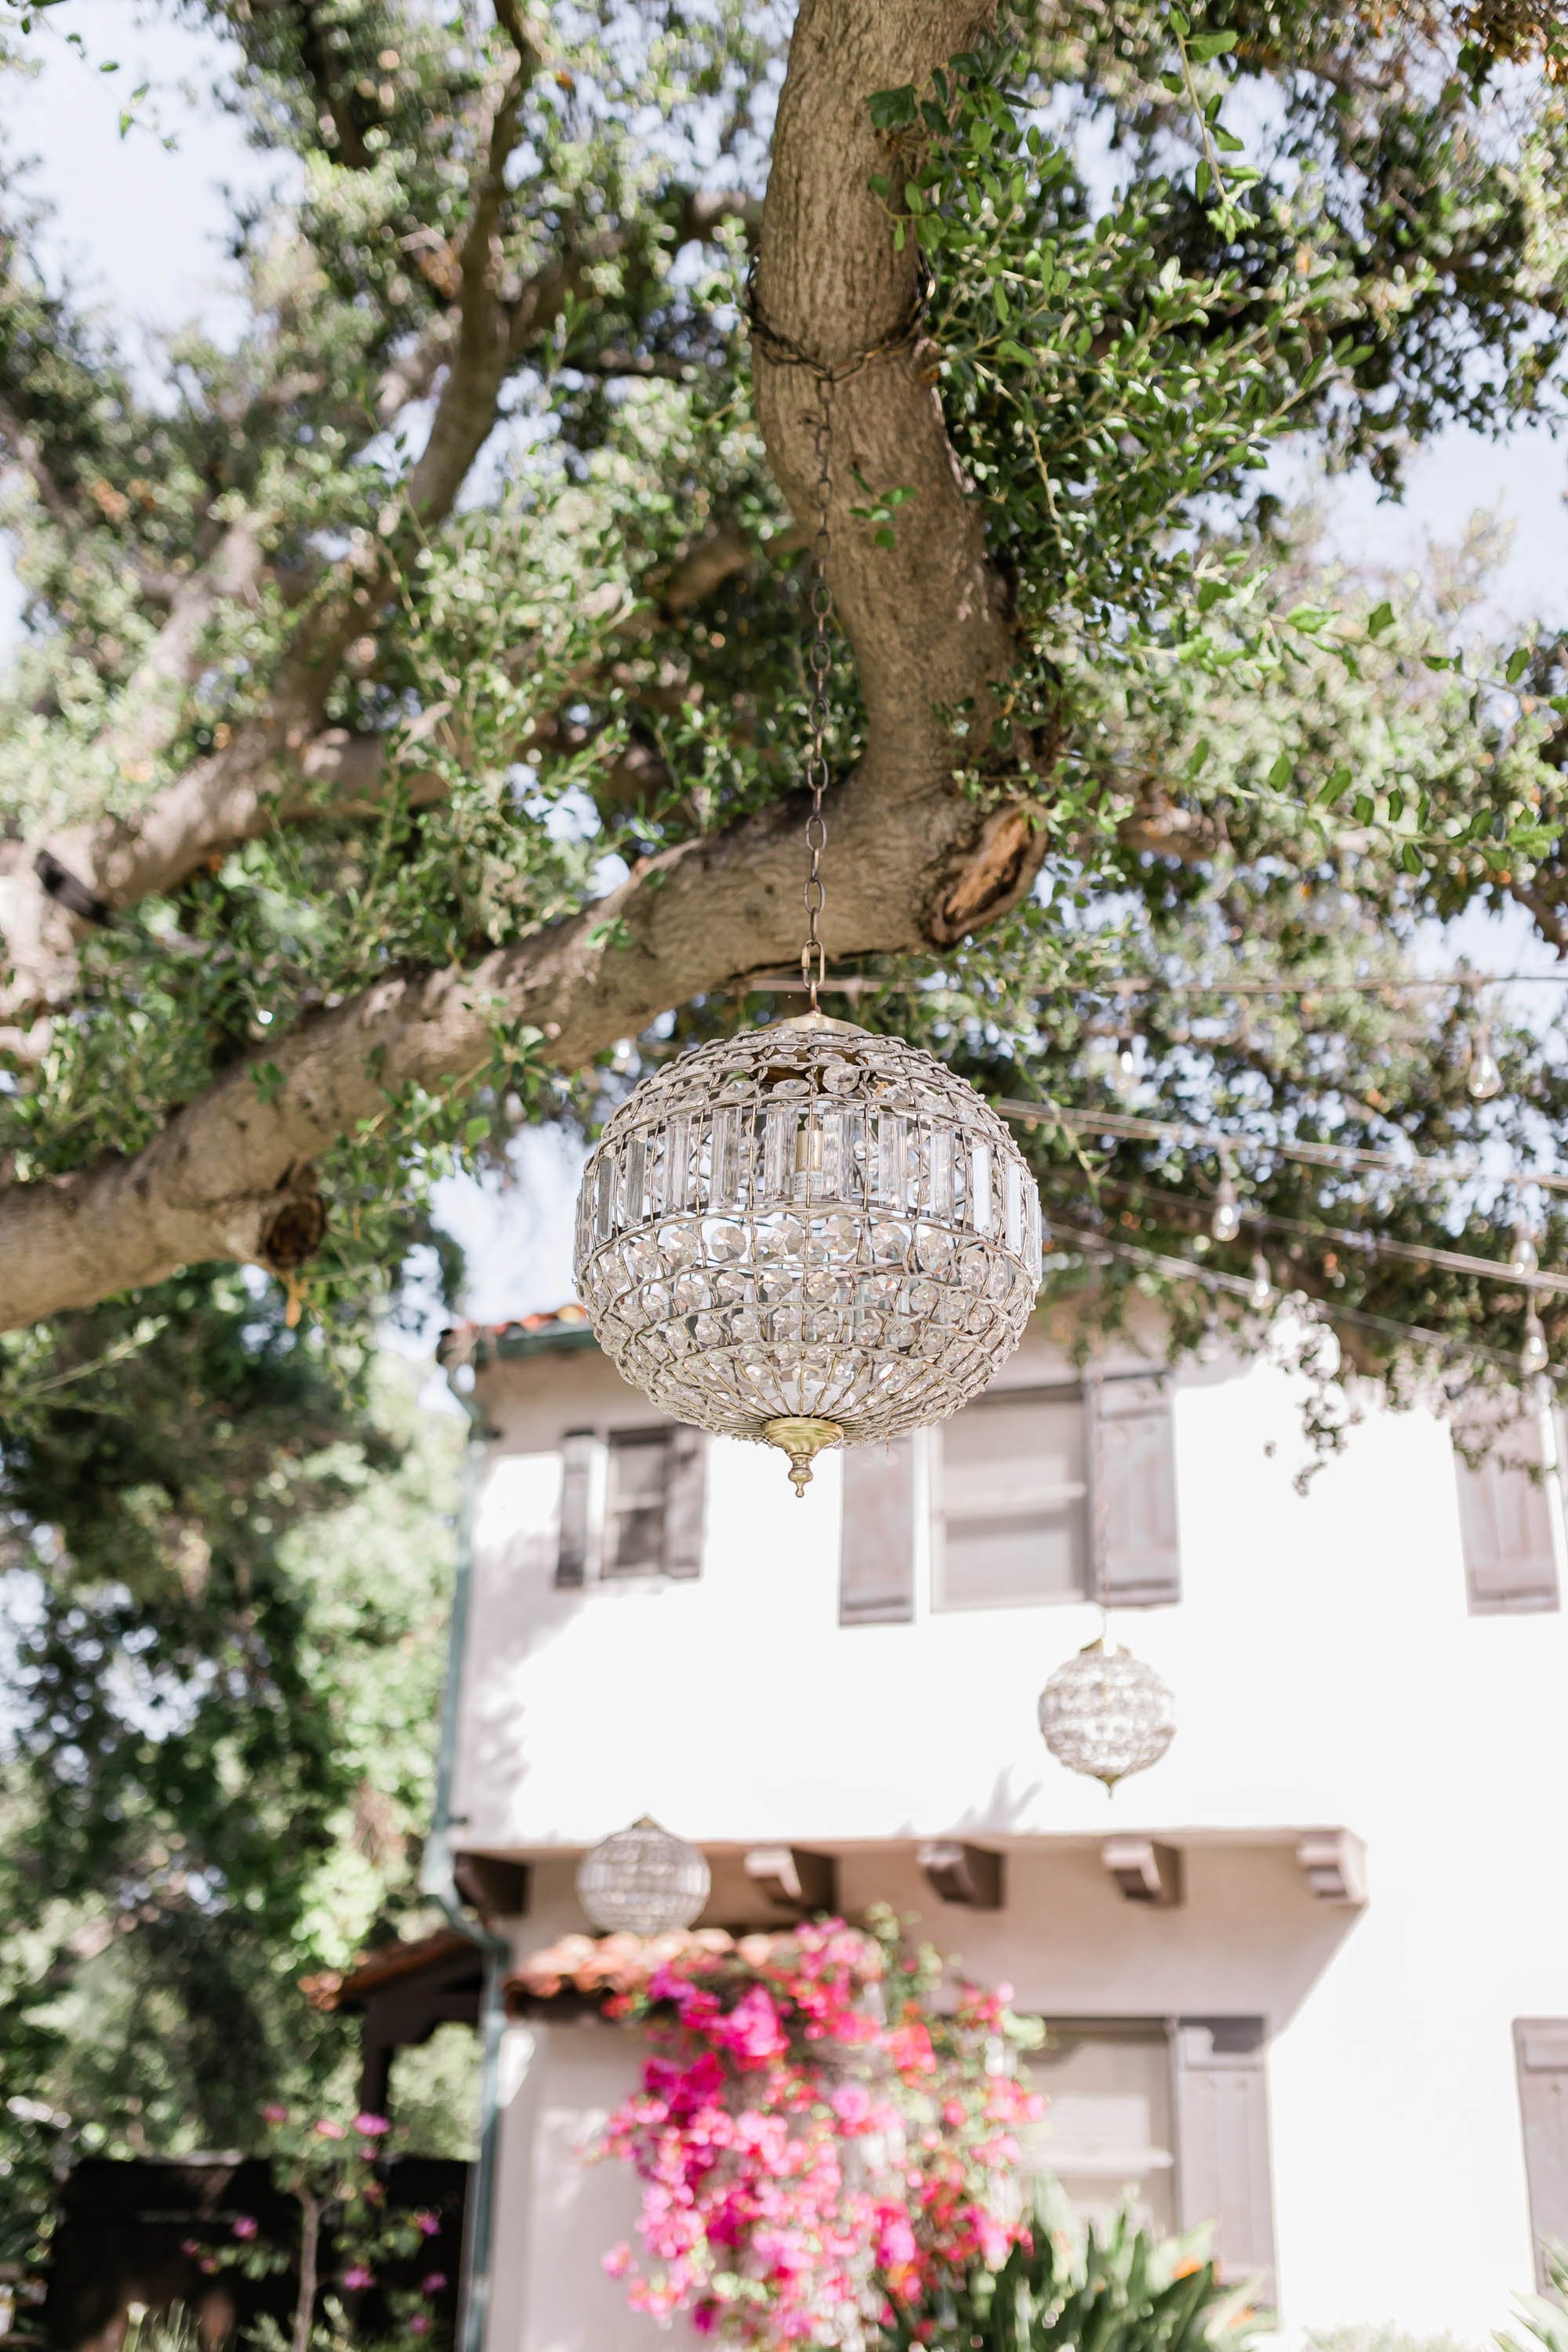 Outdoor reception space under tree with twinkle lights at Spanish style ranch house at Quail Ranch events wedding venue in Simi Valley